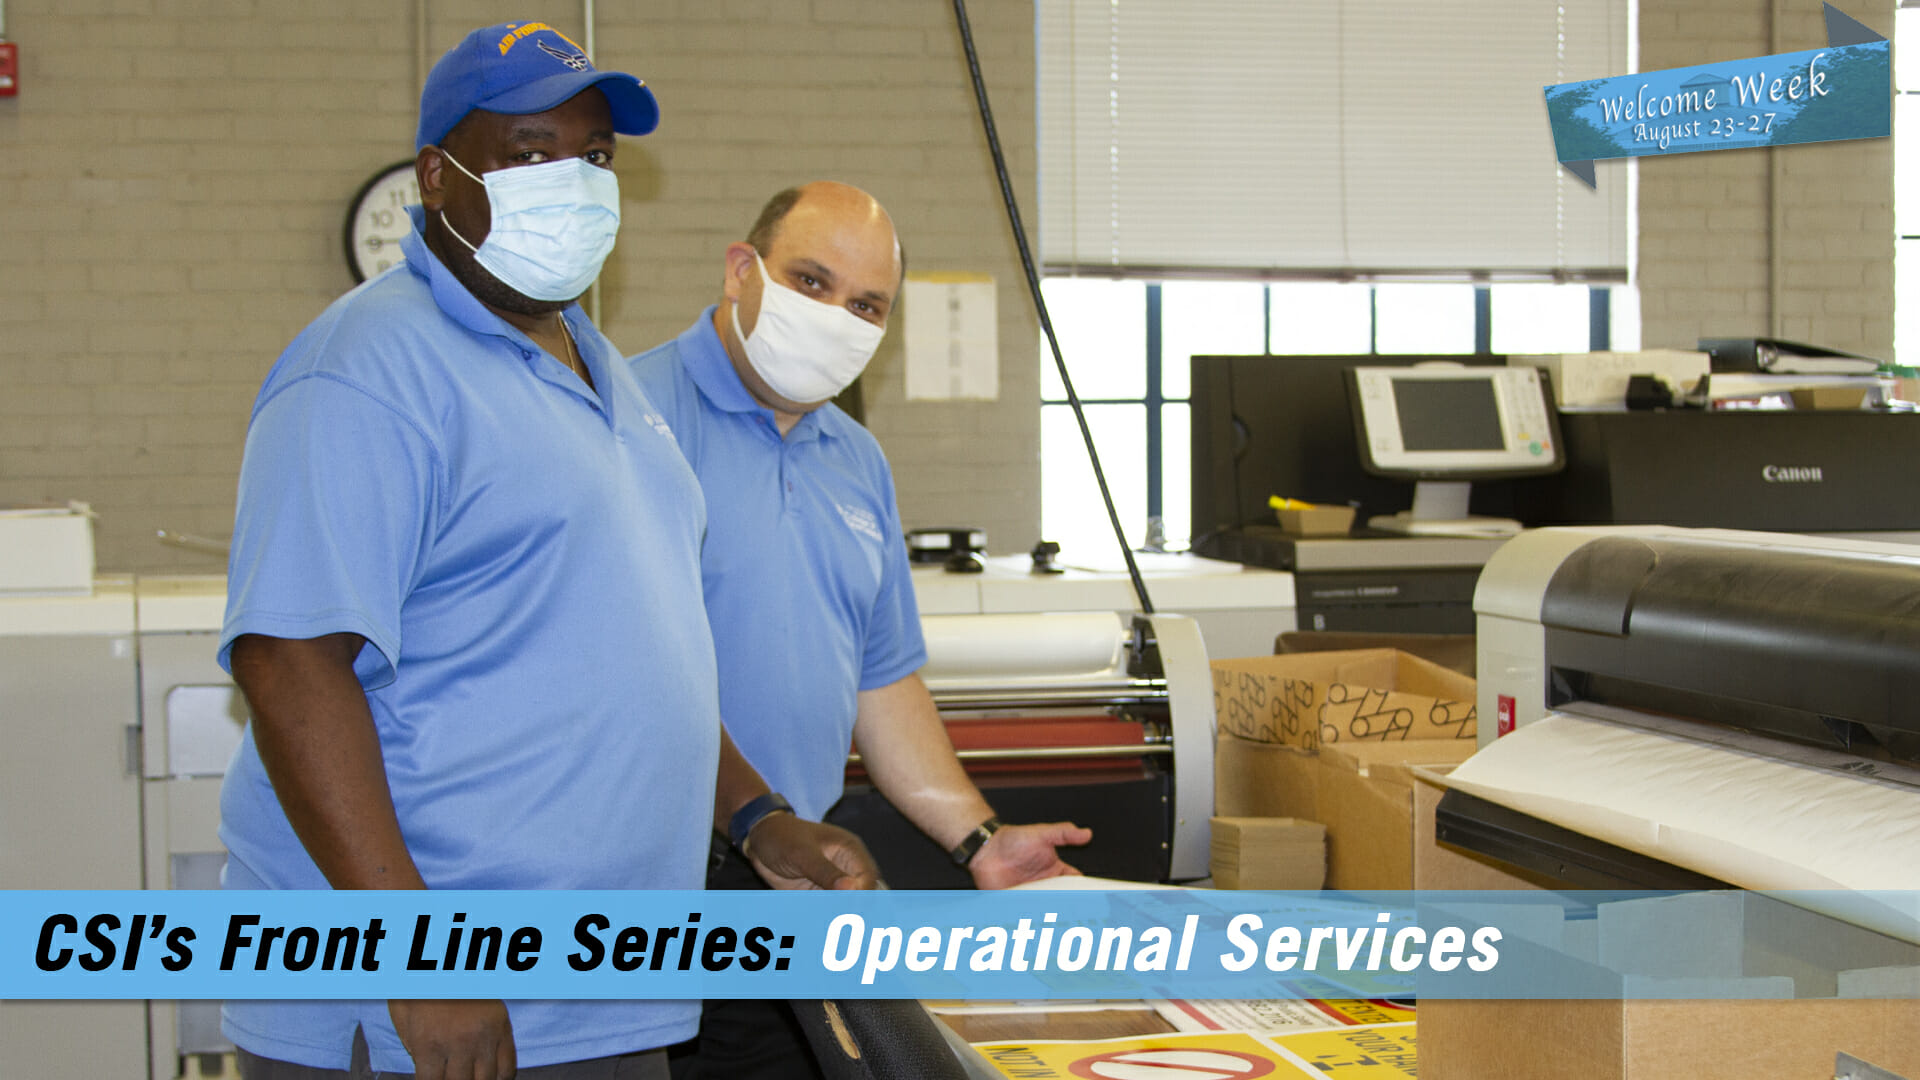 Operational Services Continues to Deliver during the Pandemic